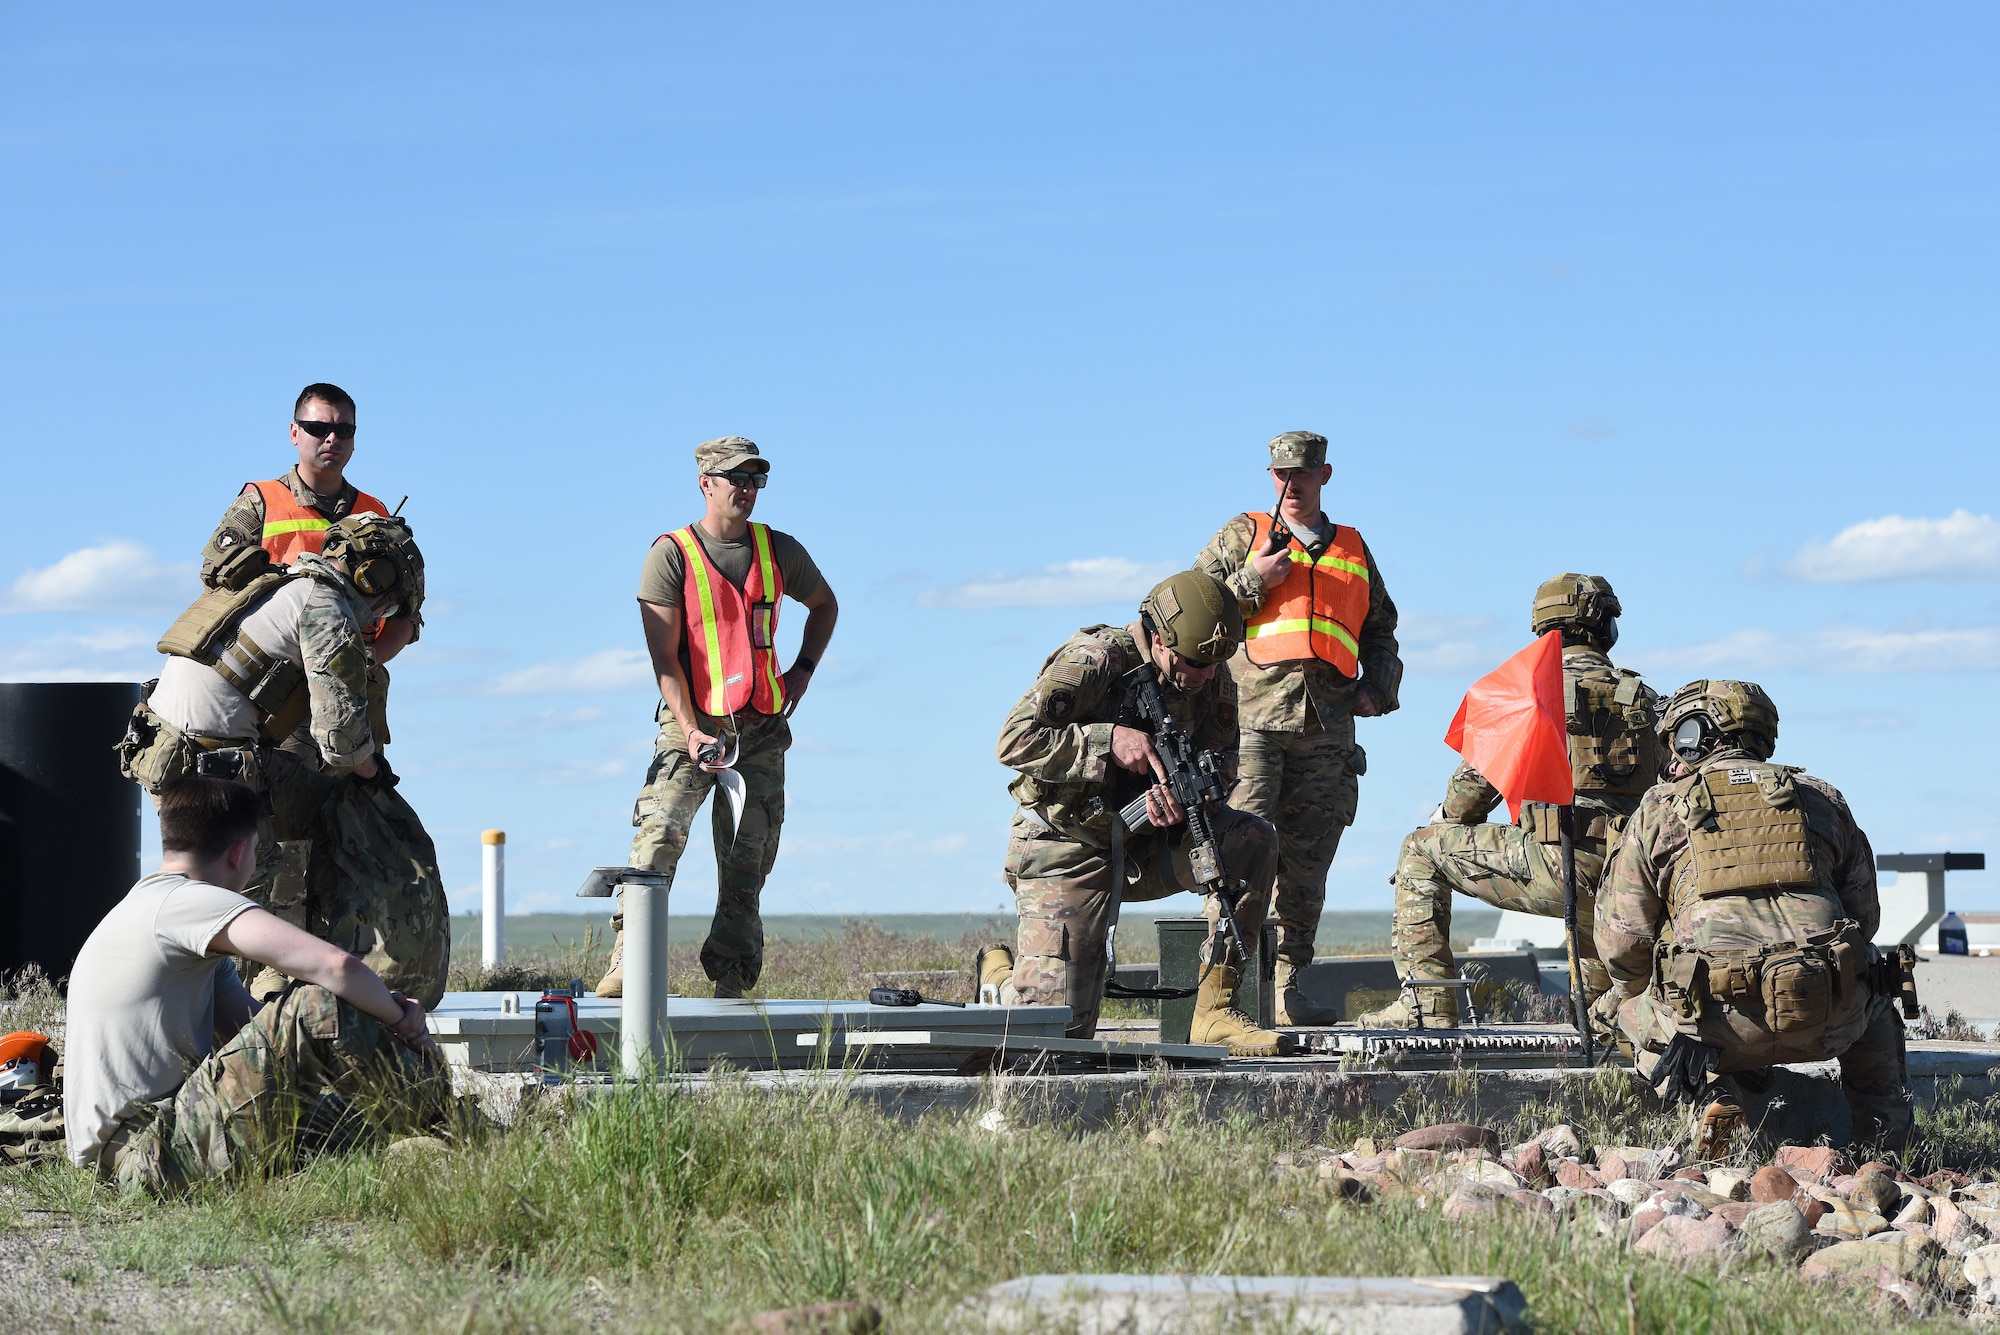 Airmen survey a launch facility integrated recapture and recovery exercise June 11, 2019, at an intercontinental ballistic missile launch facility near Simms, Mont.